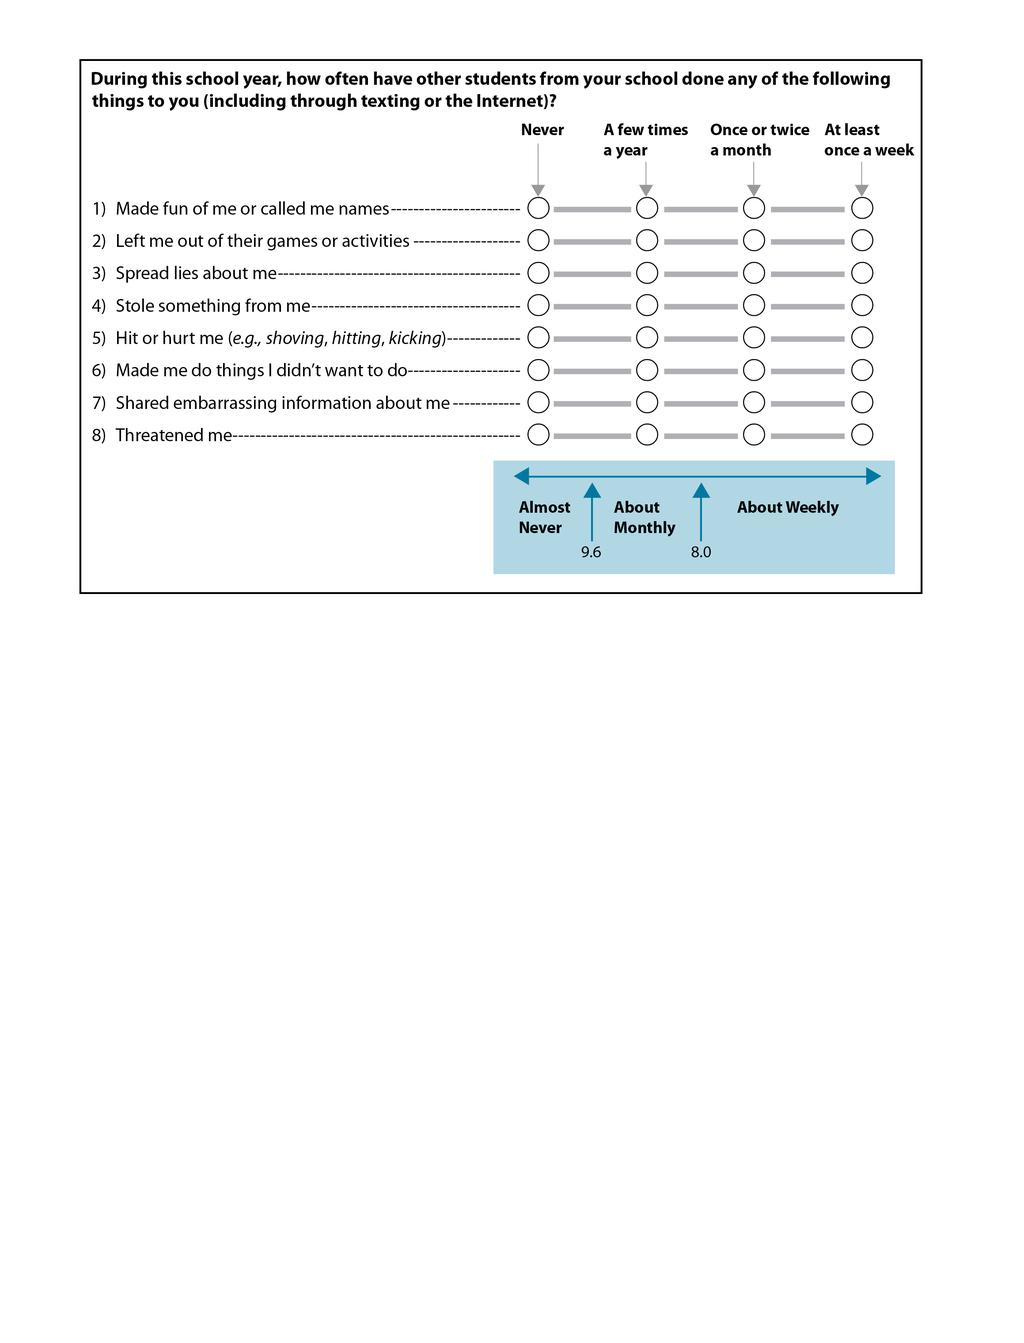 Student Bullying Scale, Fourth Grade The Student Bullying (SB) scale was created based on students responses to how often they experienced the eight bullying behaviors